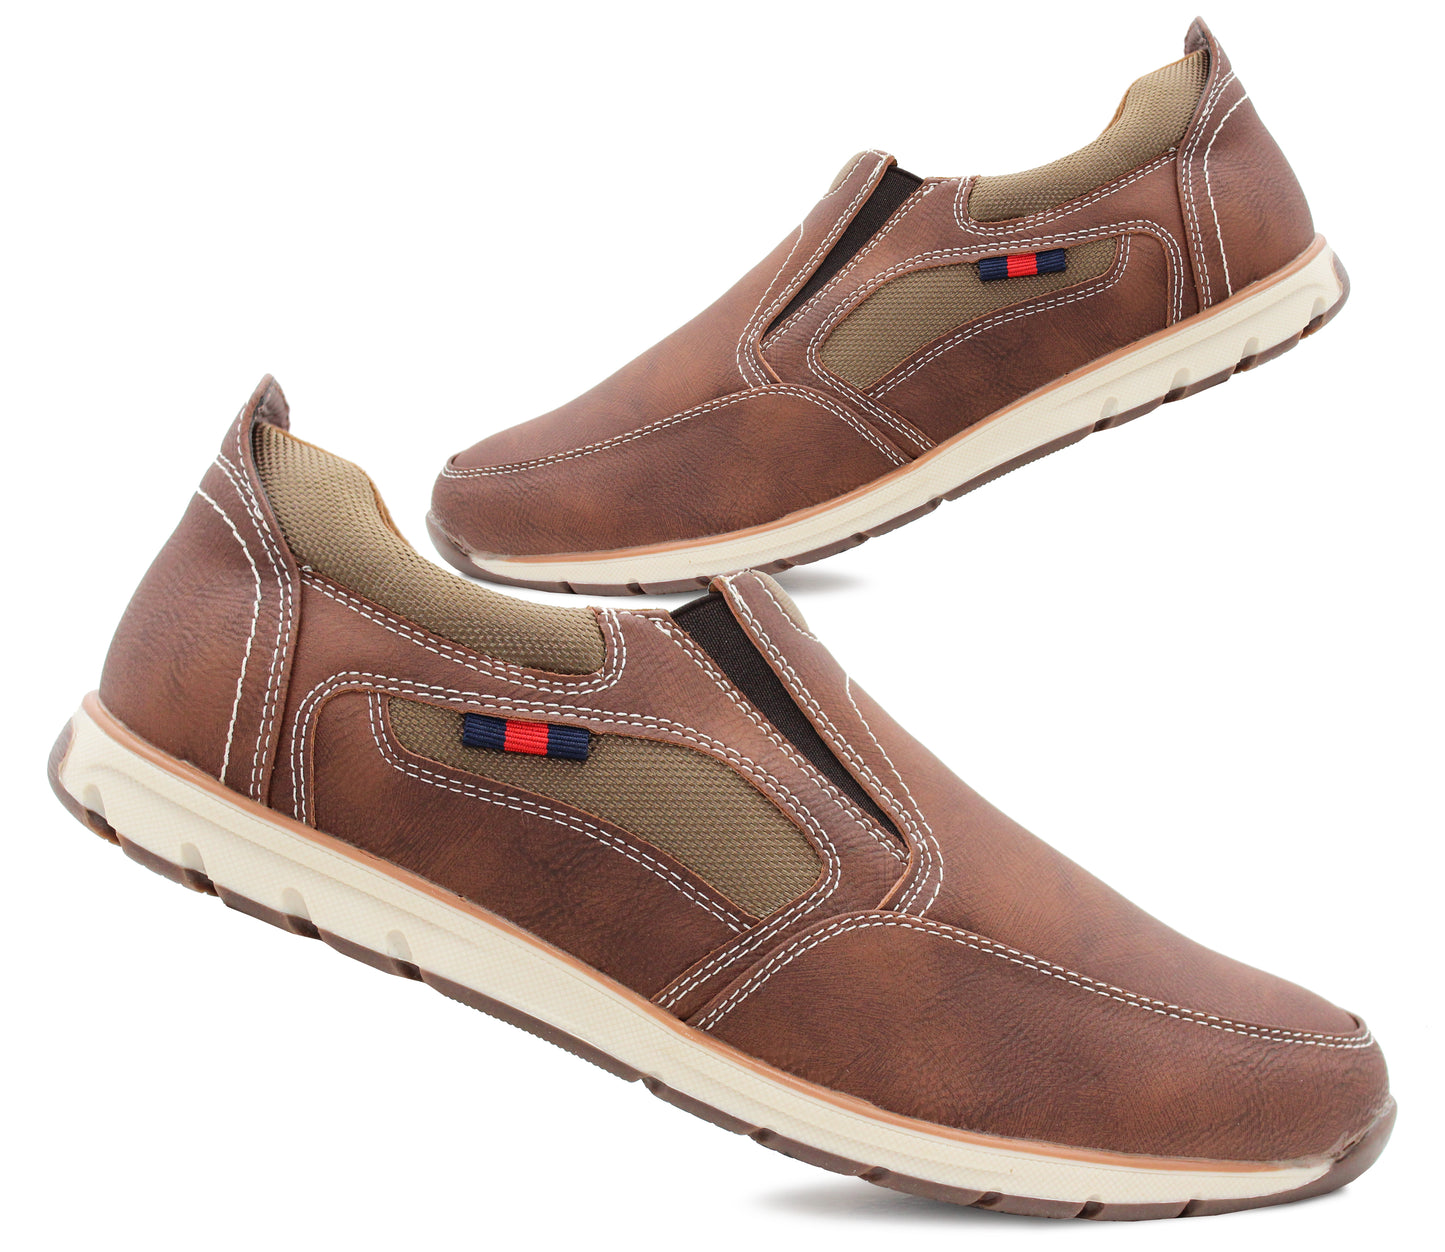 KENNY Mens Casual Slip On Driving Loafers in Tan